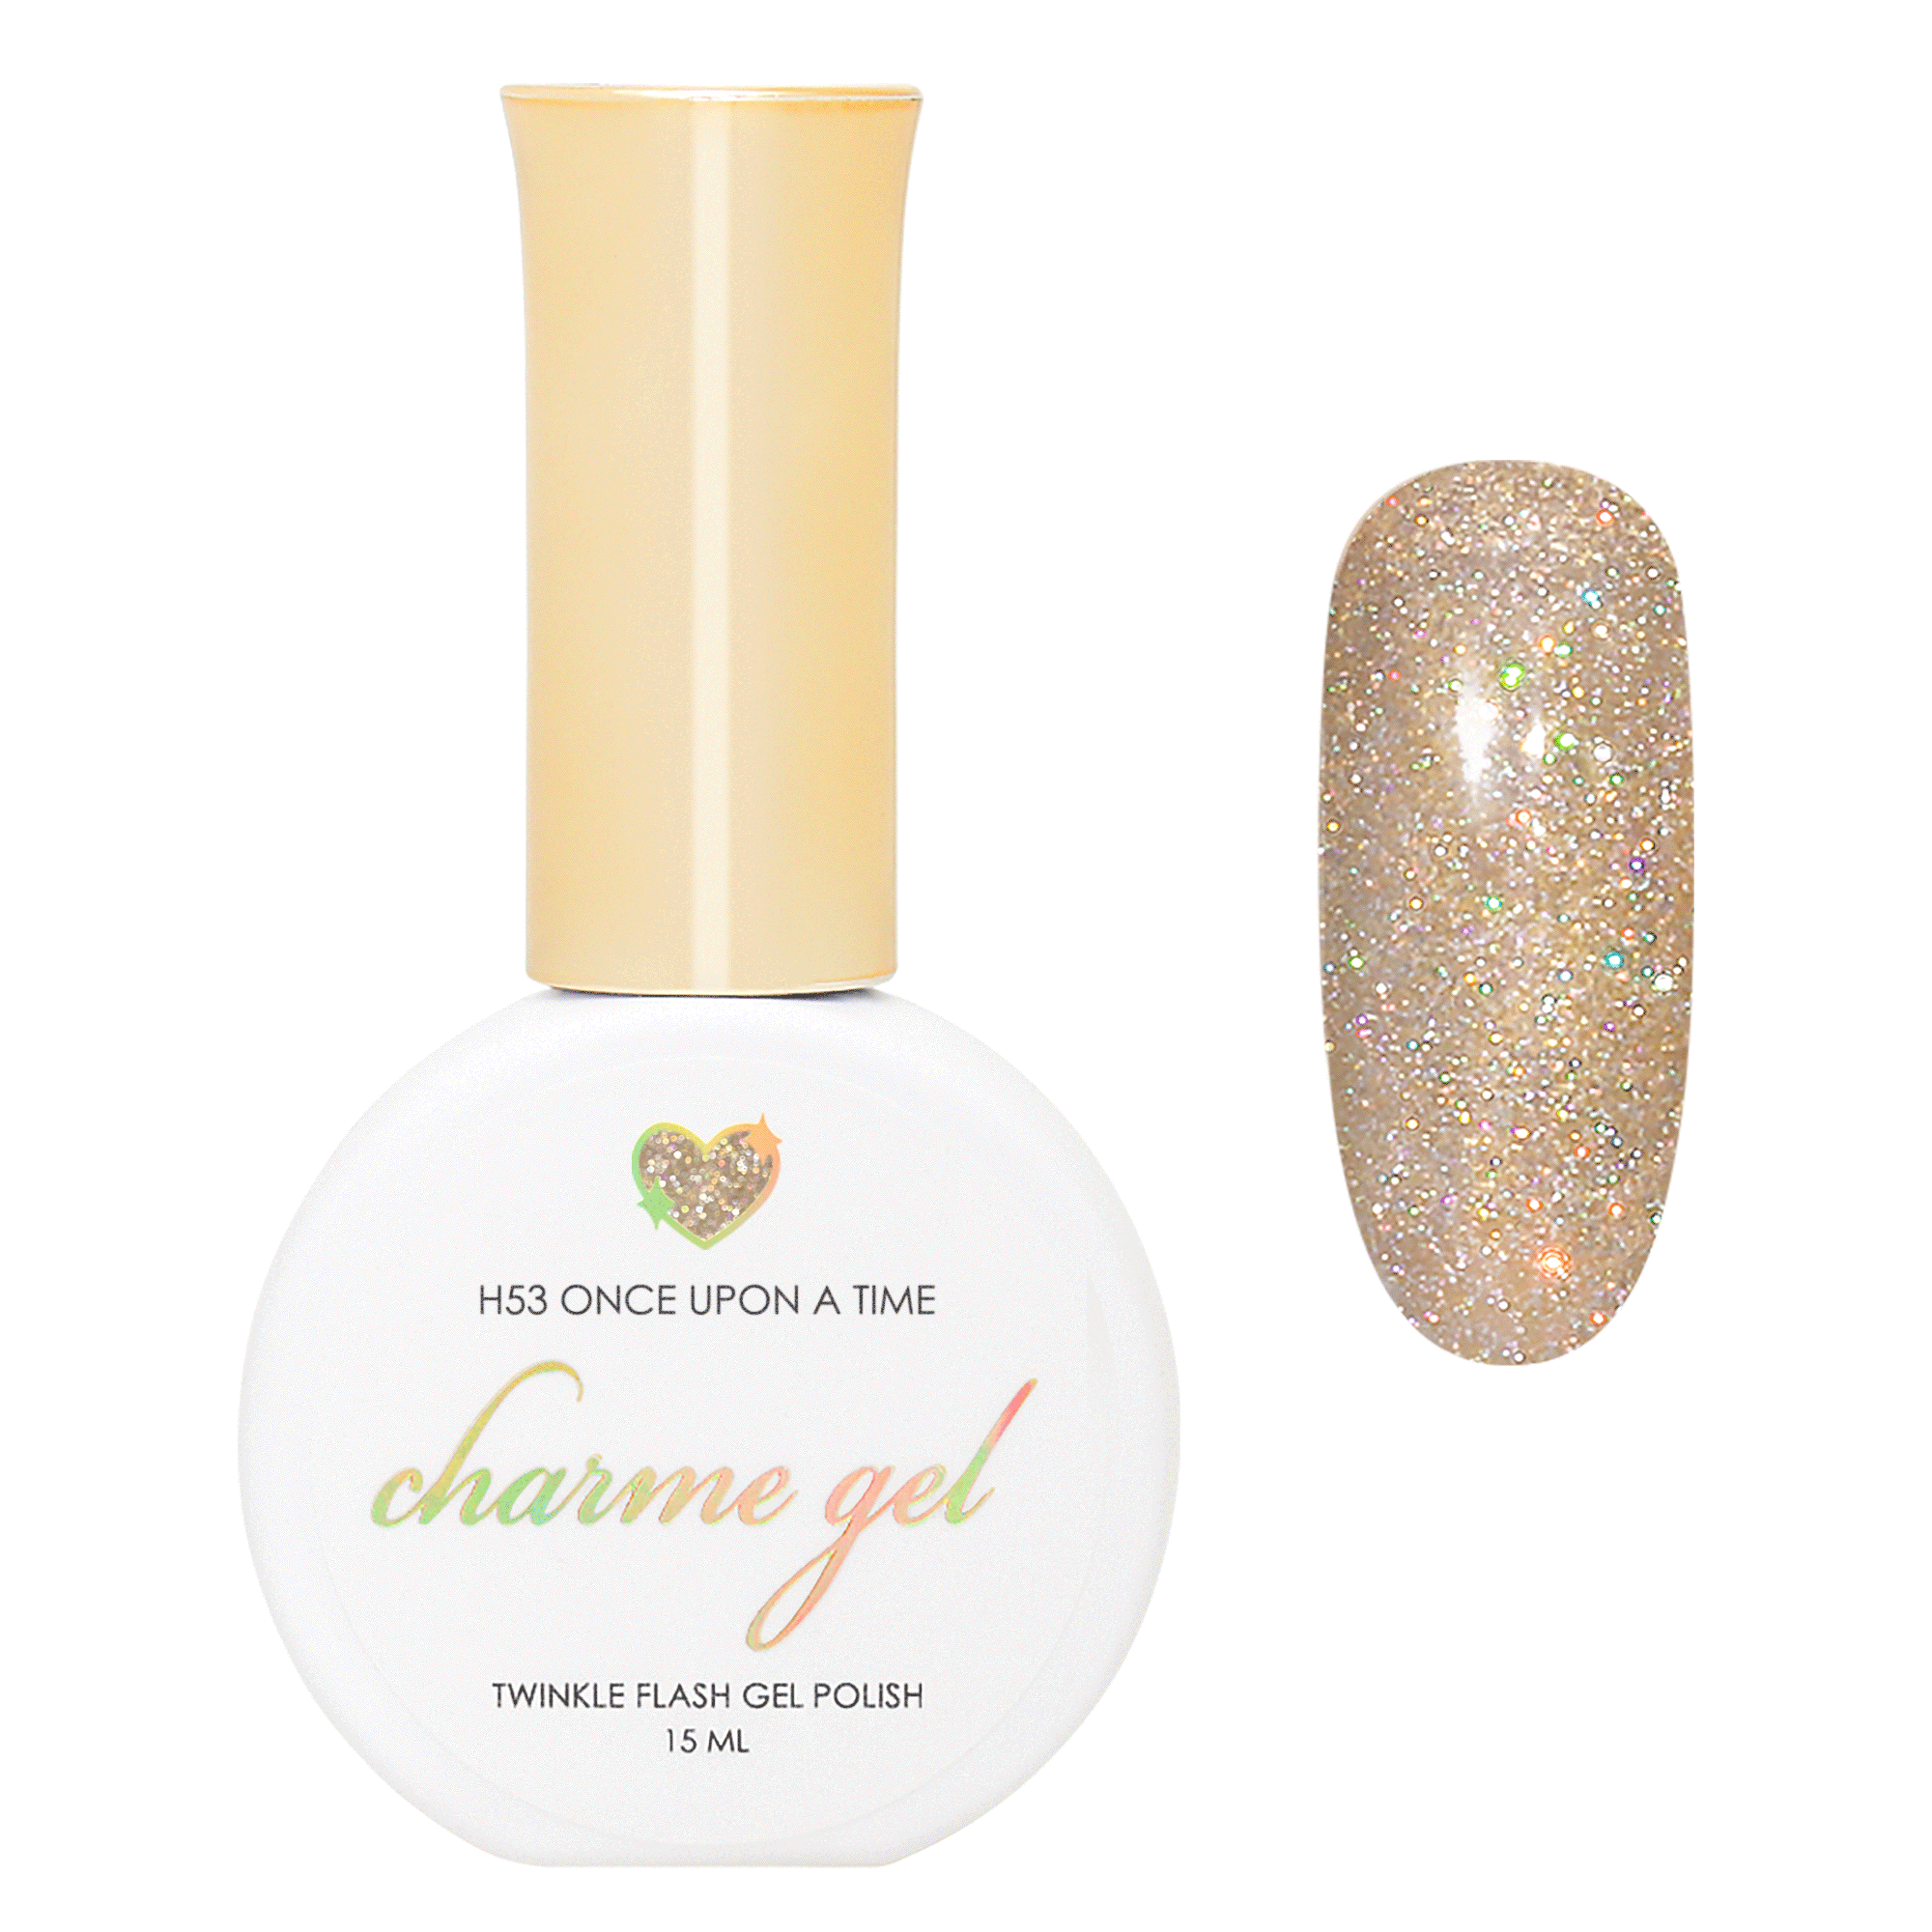 Charme Gel / Holographic Twinkle H53 Once Upon A Time Beige Neutral Reflective Glitter Polish